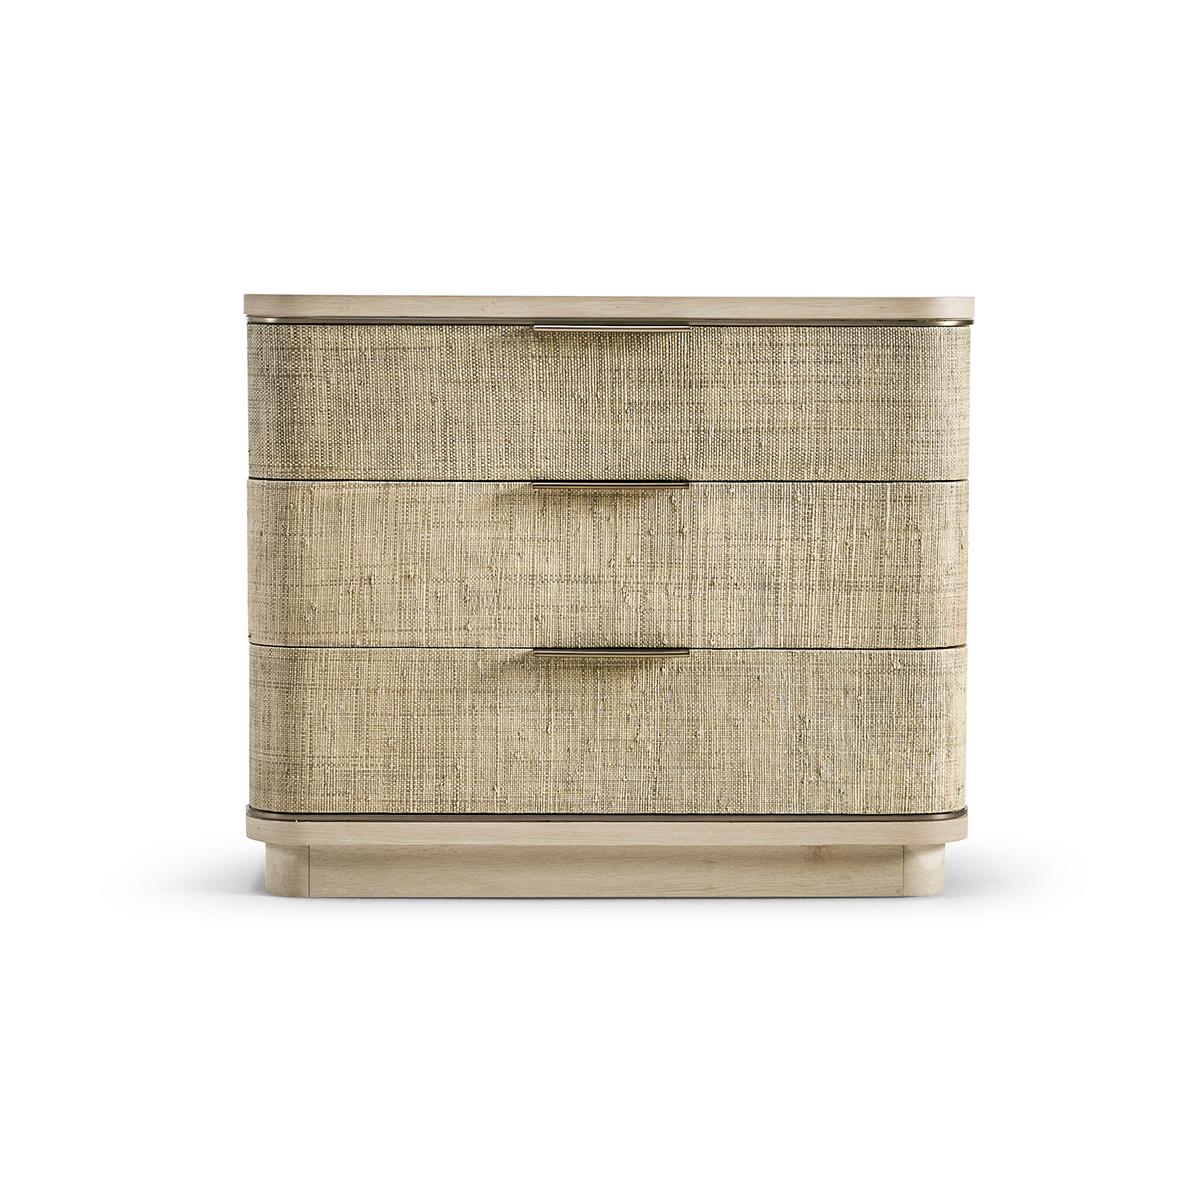 Modern woven nightstand, a beautifully crafted piece is born from passion and boasts incredible aesthetic details that are sure to take your breath away.

The nightstand's three bleached oak drawers are wrapped in grasscloth, adding a subtle